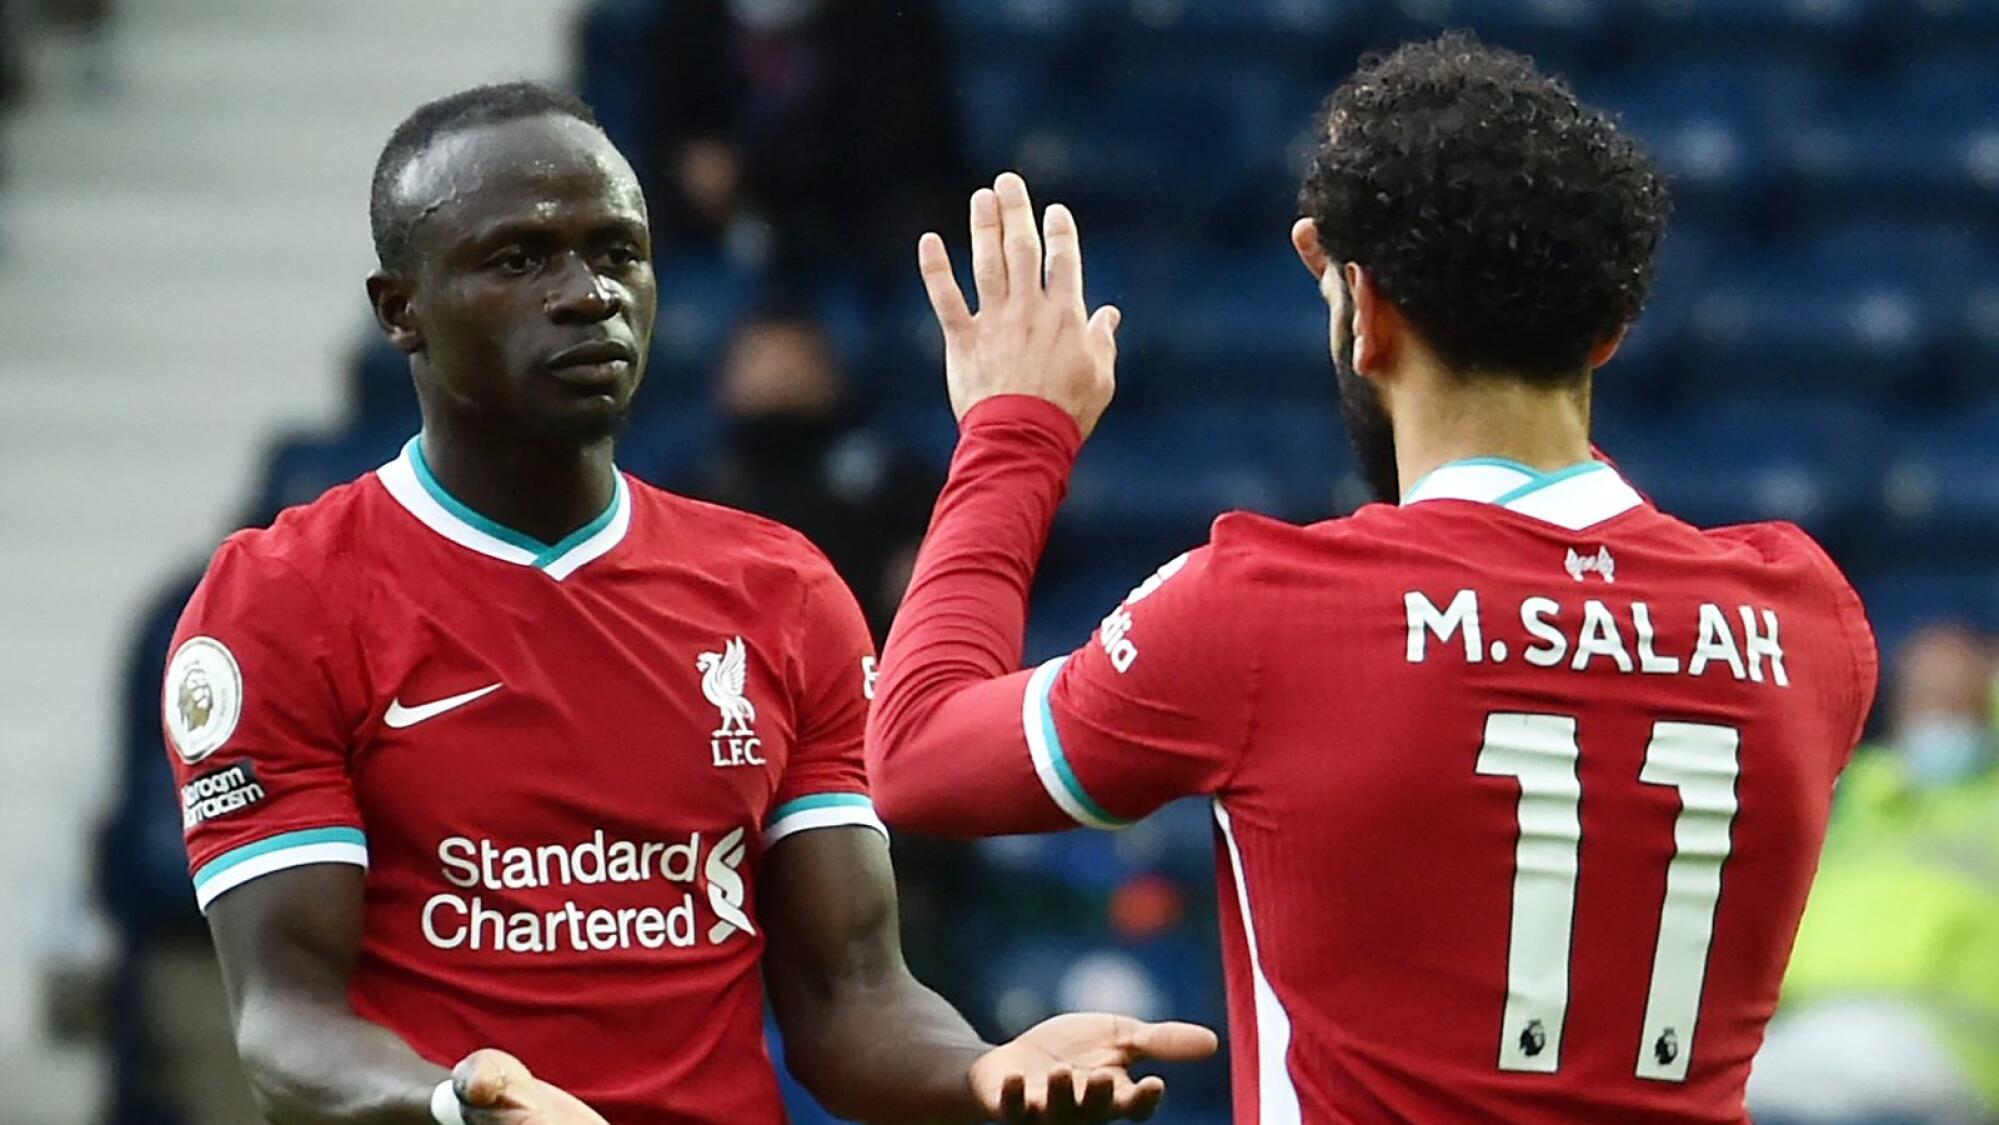 Liverpool Mohamed Salah and Sadio Mane are on track for a final showdown at the Africa Cup of Nations